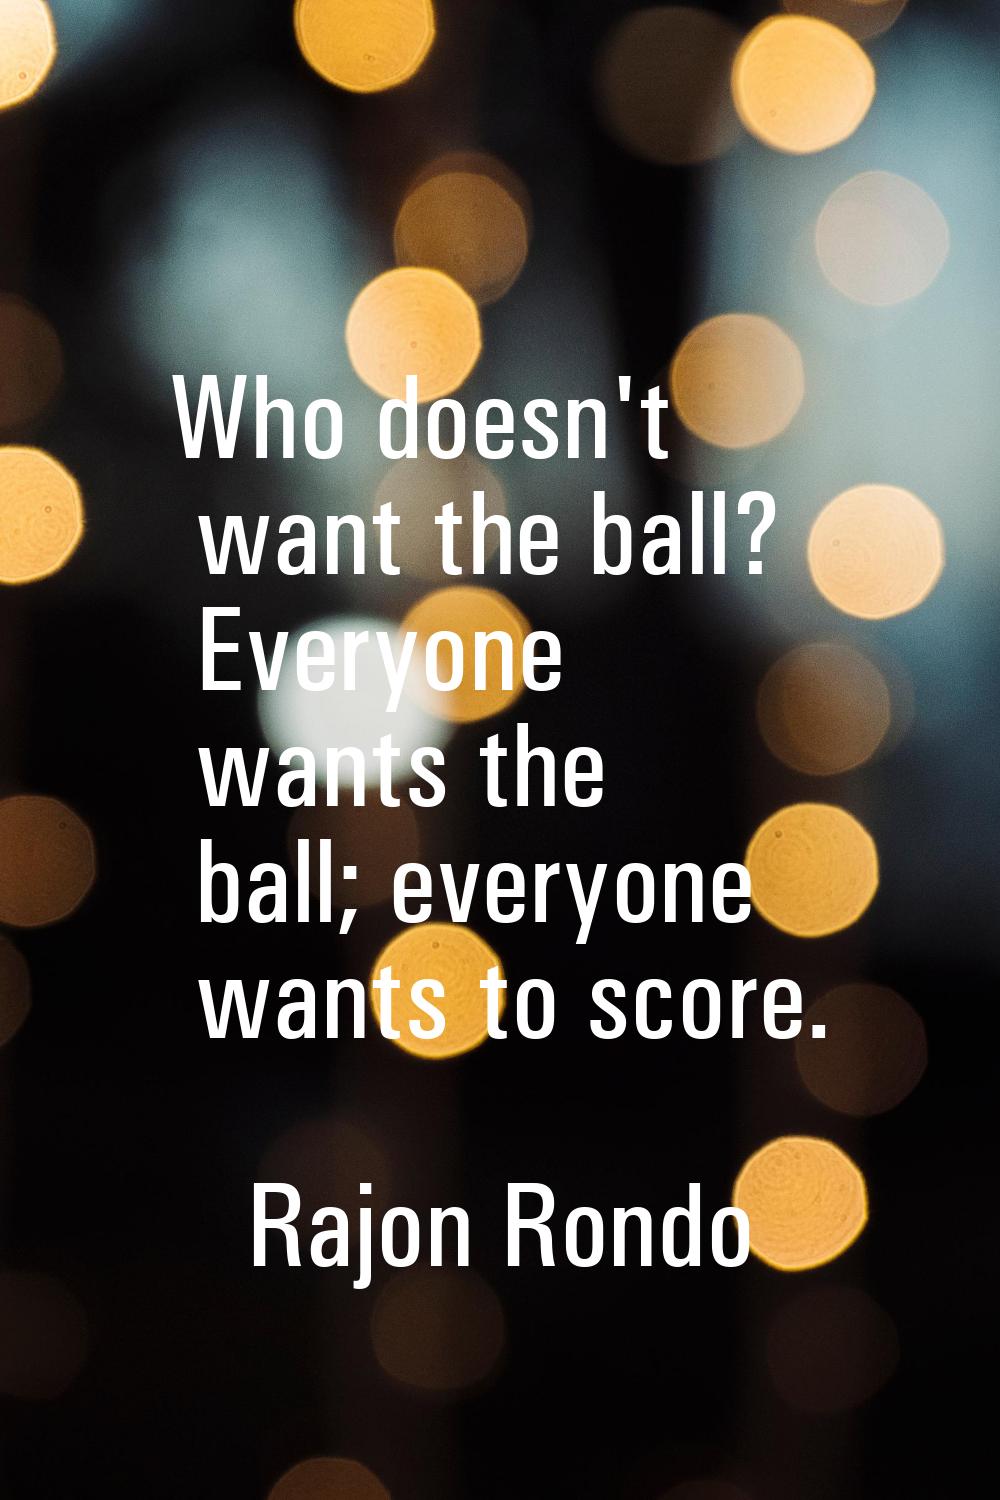 Who doesn't want the ball? Everyone wants the ball; everyone wants to score.